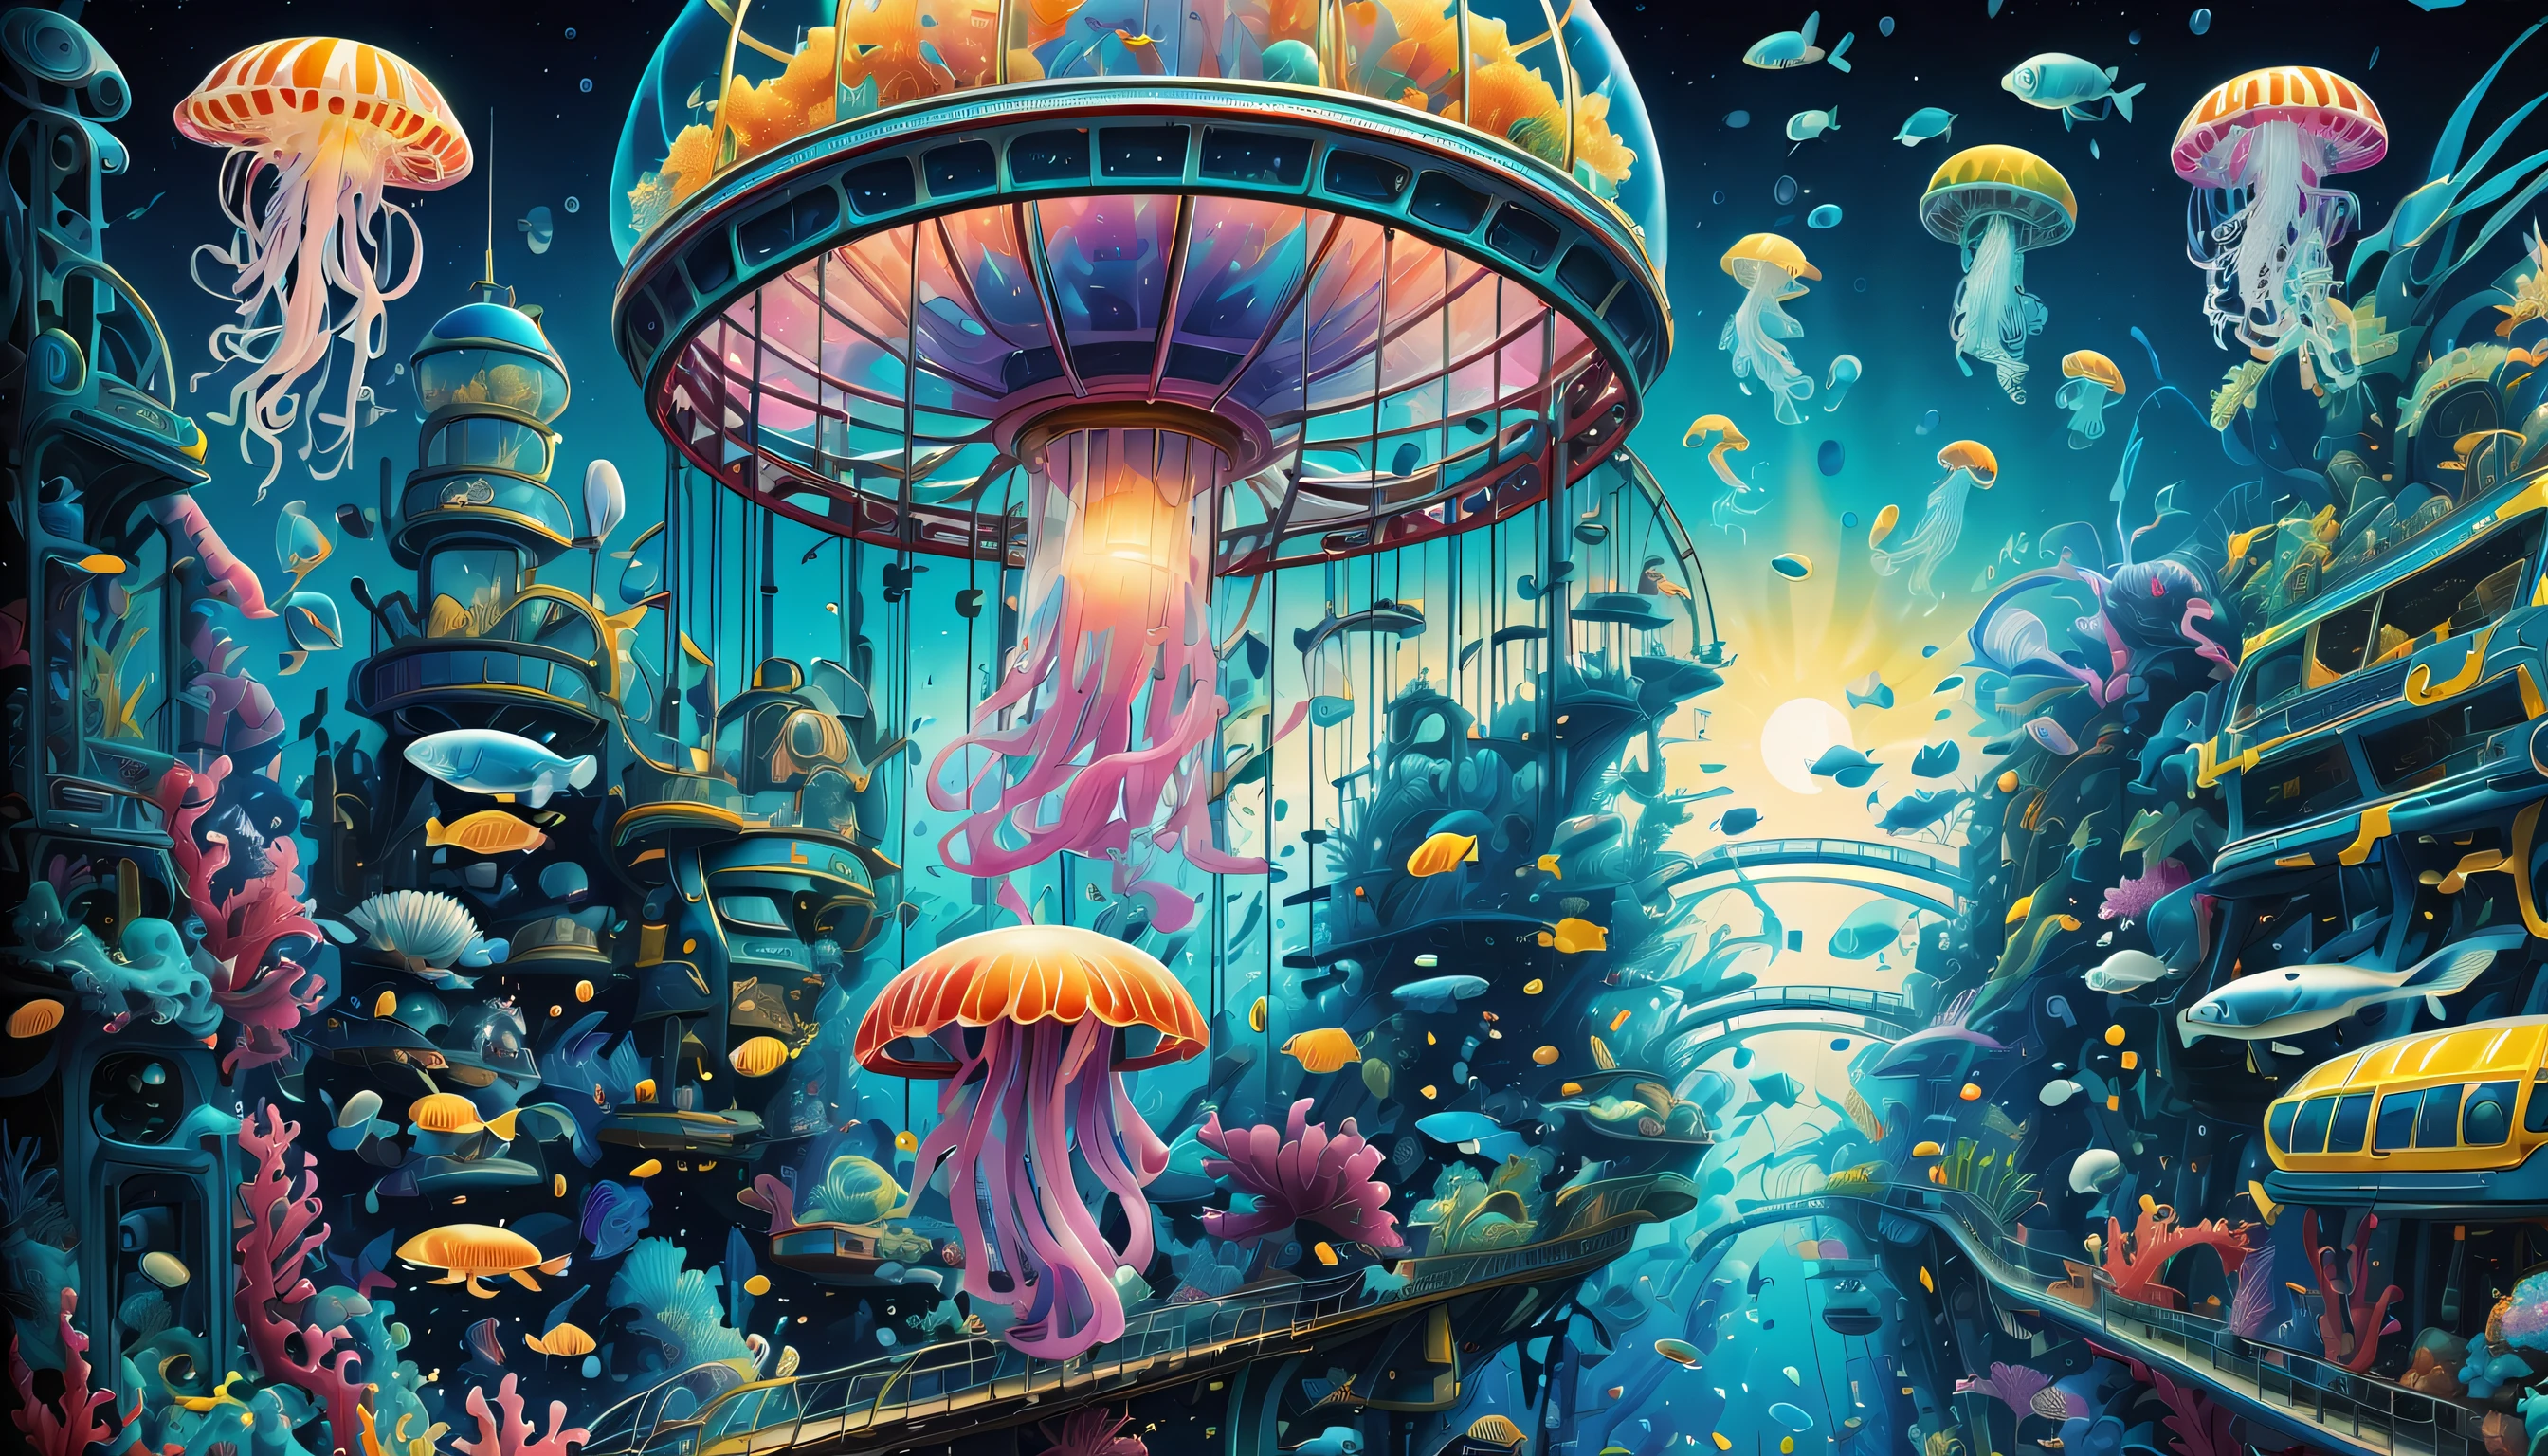 very detailed gouache painting, (((deep sea futuristic_theme_A park integrated with an aquarium with extremely detailed gouache illustrations:1.4))), (((futuristic intricate details_underwater futuristic_SF_roller_coaster and ferris wheel_Wheel:1.4))), (((See breathtaking pop spectacles_color jellyfish street_light:1.3))), Its fantastic brilliance is captured in amazing detail.、Brought to life with unparalleled skill and craftsmanship。. Intricate details and textures in silver and gold metallics, Adorable expression, (((A true masterpiece of the highest quality:1.4))), Cool and cute, enjoy sculpture, Showcasing the artist&#39;s skillful brushwork. The artist&#39;s skillful brushwork was demonstrated, Intricate details, complex brush strokes, insane handwriting, Fine brushstrokes, (((High quality with high transparency:1.3))), (((highest quality render:1.3))), (((Everything comes into sharp focus:1.3))), Images that exude an otherworldly aura, (((Great addition digital painting:1.3))), (((Radiosity rendered in astonishing 32K resolution:1.4))), Highest Quality, hightquality, Highest Quality Masterpiece, Visually appealing and appealing images, Best possible quality, Everything in focus is sharp, extravagant wishes, The contour lines created give off an amazingly beautiful shine., breathtakingly complex and elaborate, Imagine a visually striking illustration, (((Intricate details effortlessly blend fantasy and reality:1.5))),